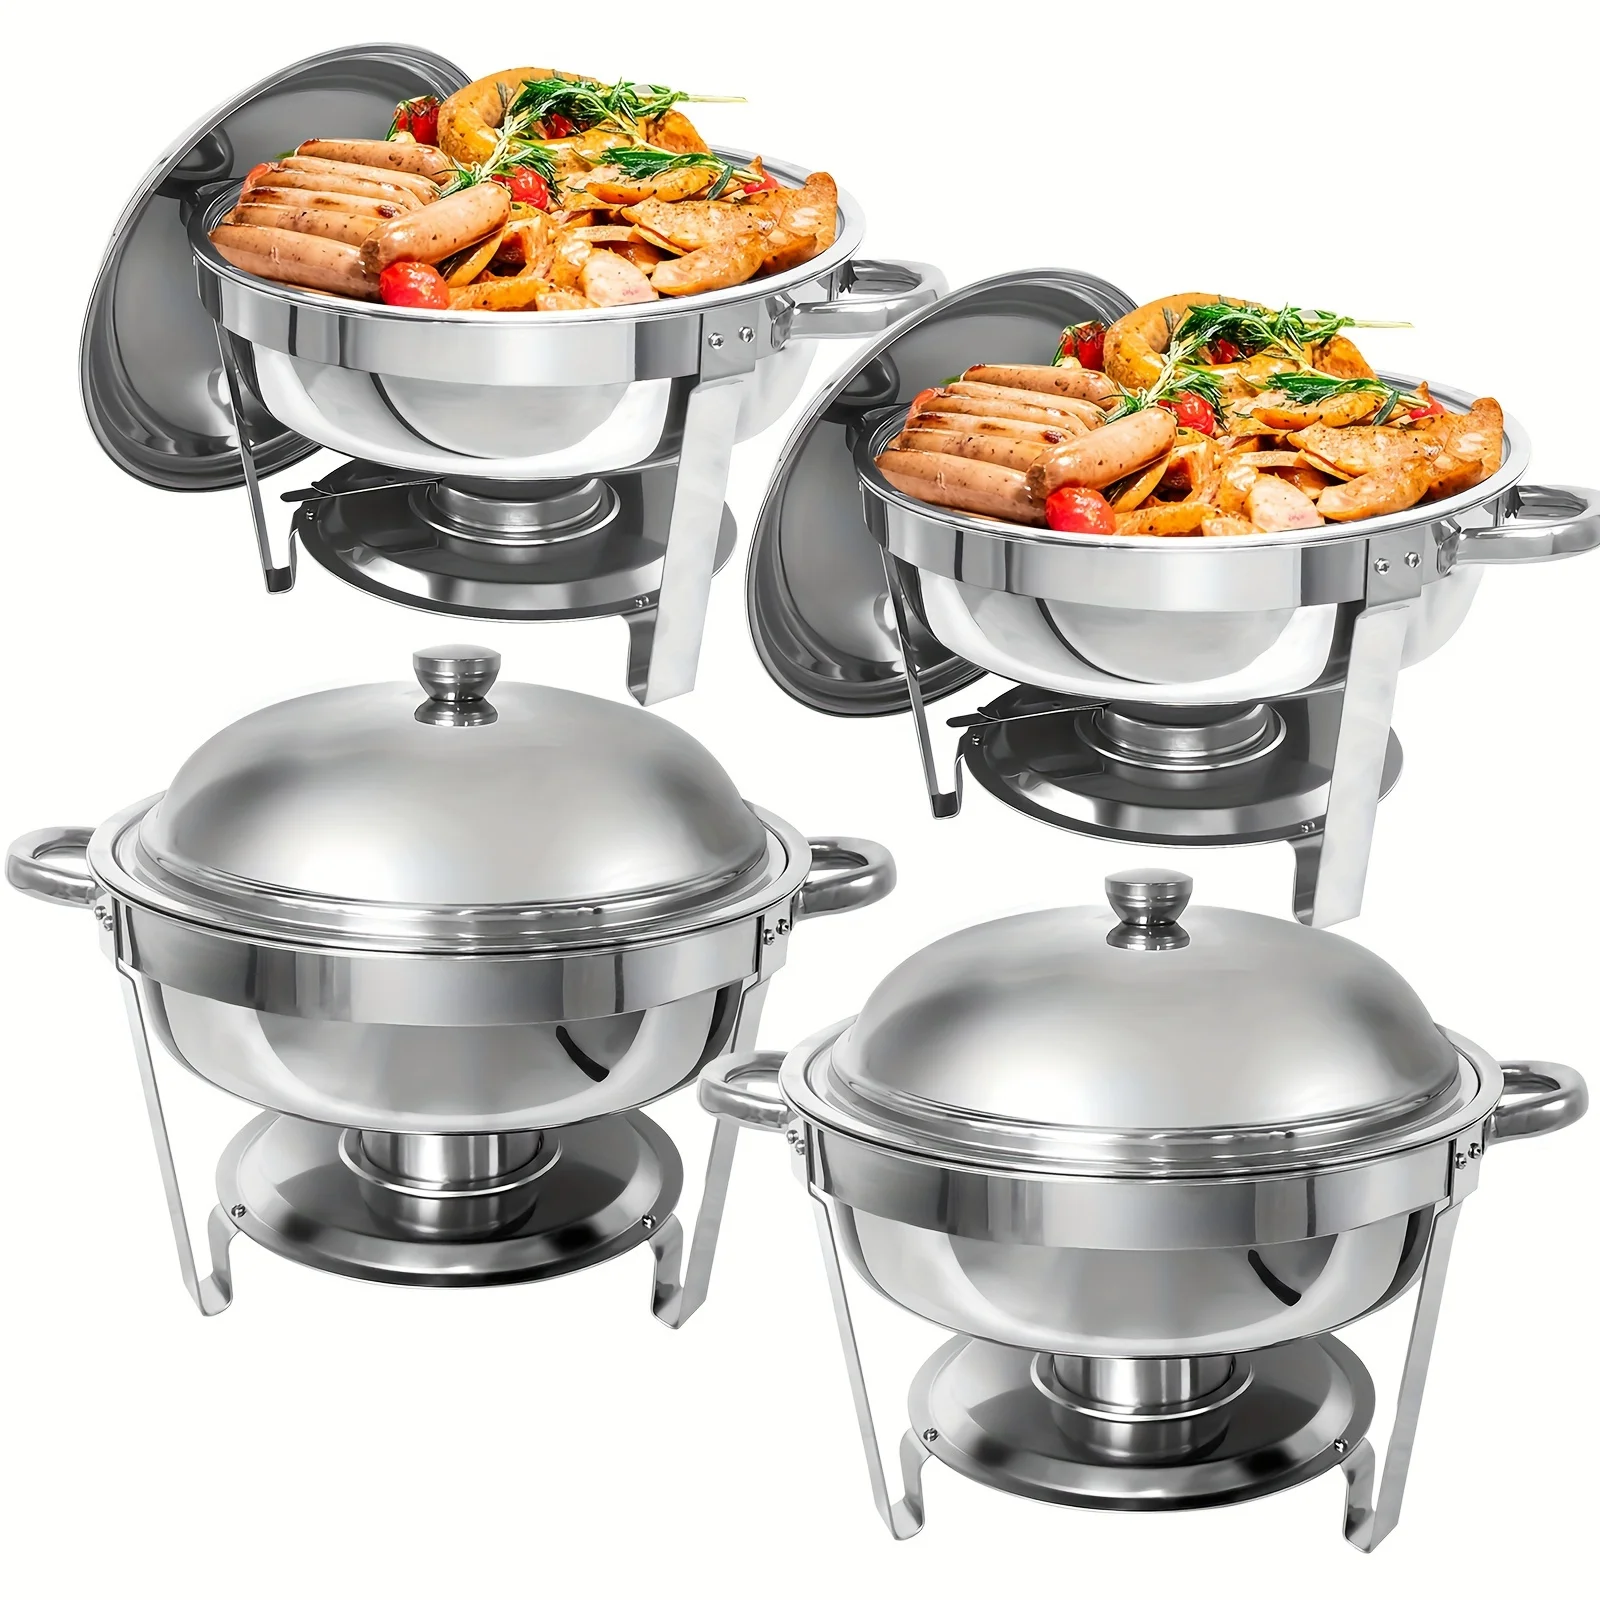 

2/4pcs, 6Qt Chafing Dish Buffet Set,Stainless Steel Round Chafers And Buffet Warmers Sets With Food And Water Trays For Catering